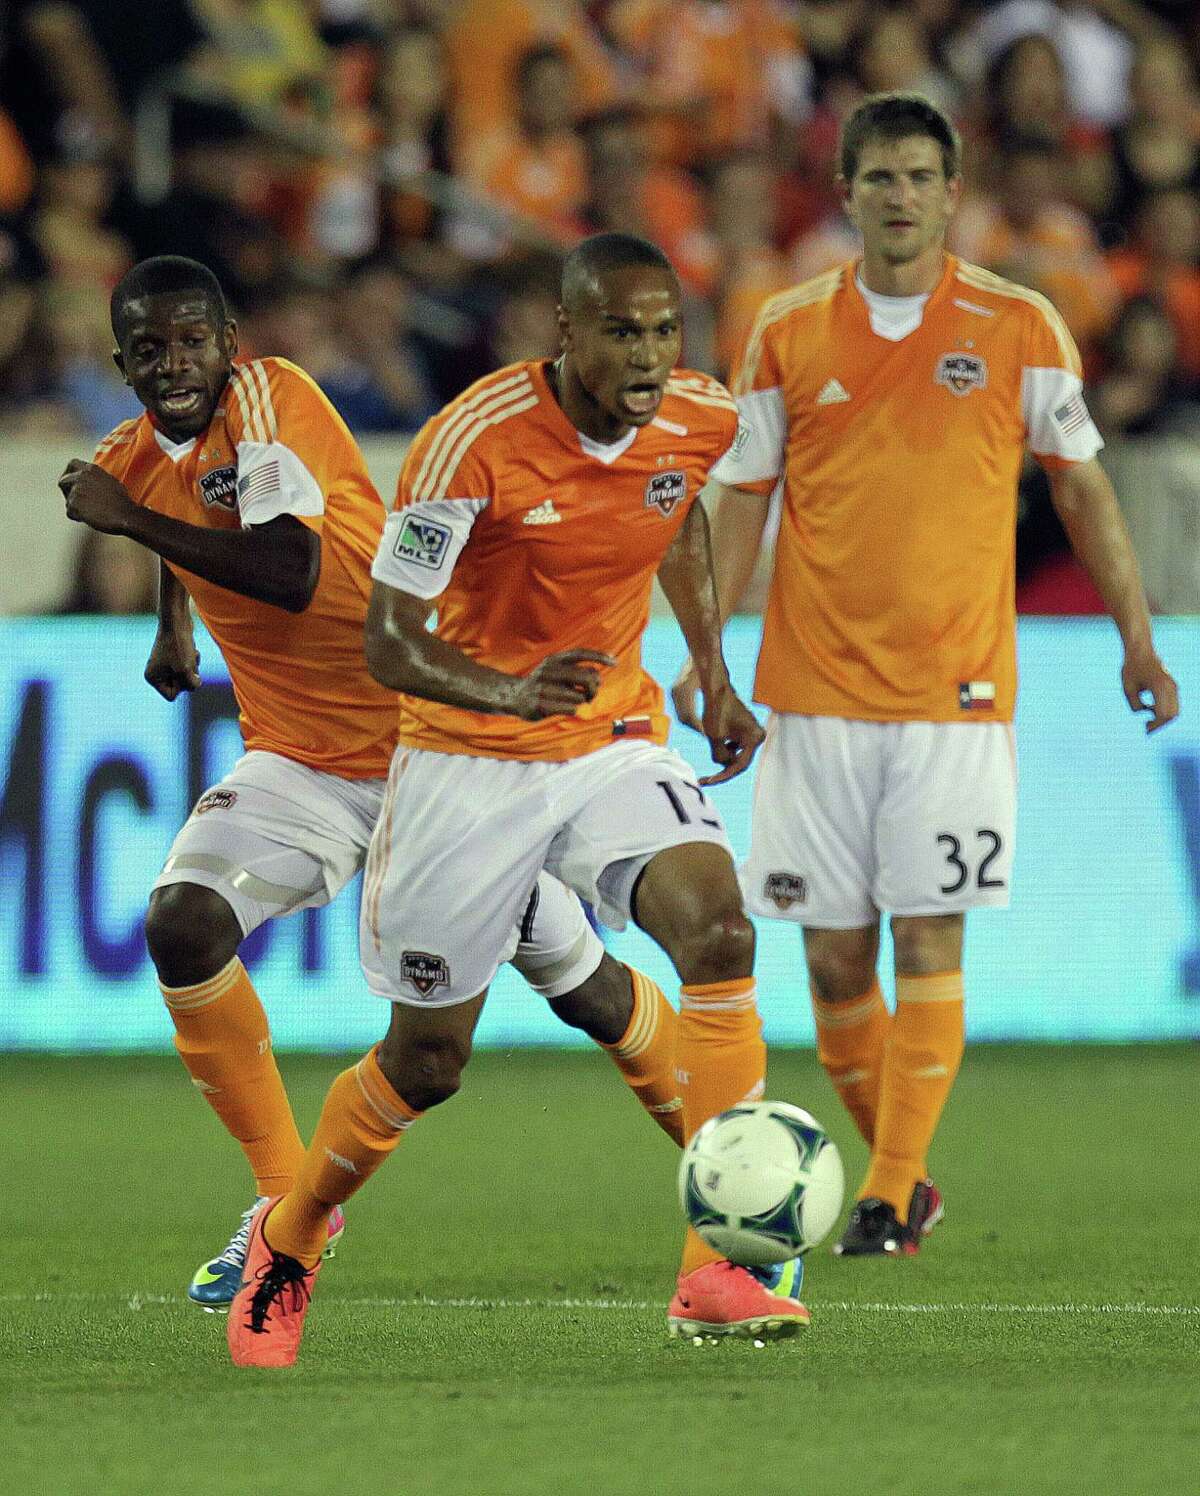 The Houston Dynamo midfielder Ricardo Clark center, moves the ball against the San Jose Earthquakes as his teammates Boniek Garcia left, and Bobby Boswell right, look on during the first half of MLS soccer game action against the San Jose Earthquakes at BBVA Compass Stadium Saturday, March 30, 2013, in Houston .